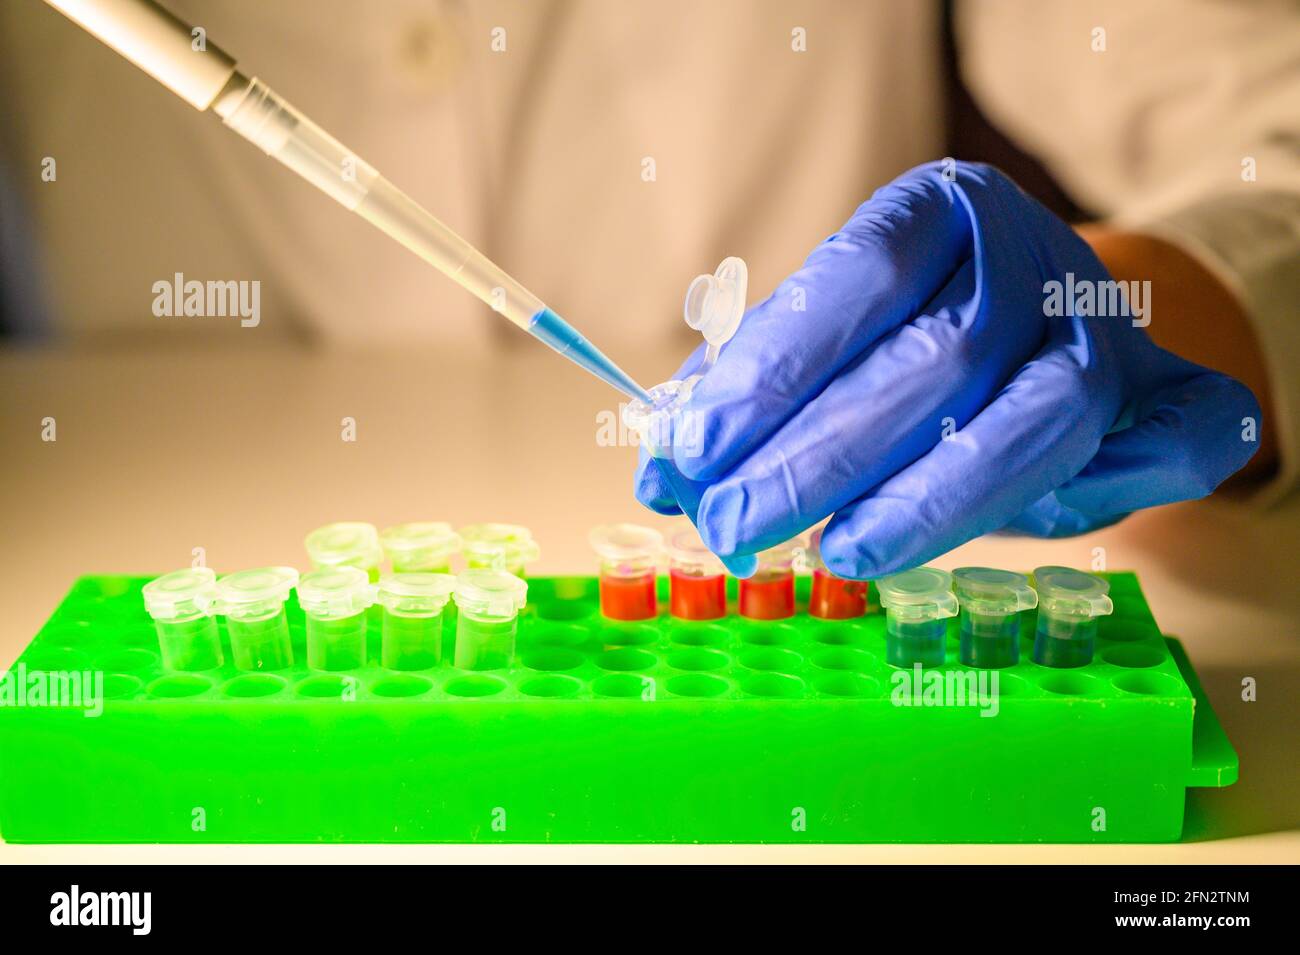 Scientist working with blue solution in eppendorf tube and pipette for biomedical research with tube rack on a white bench background Stock Photo